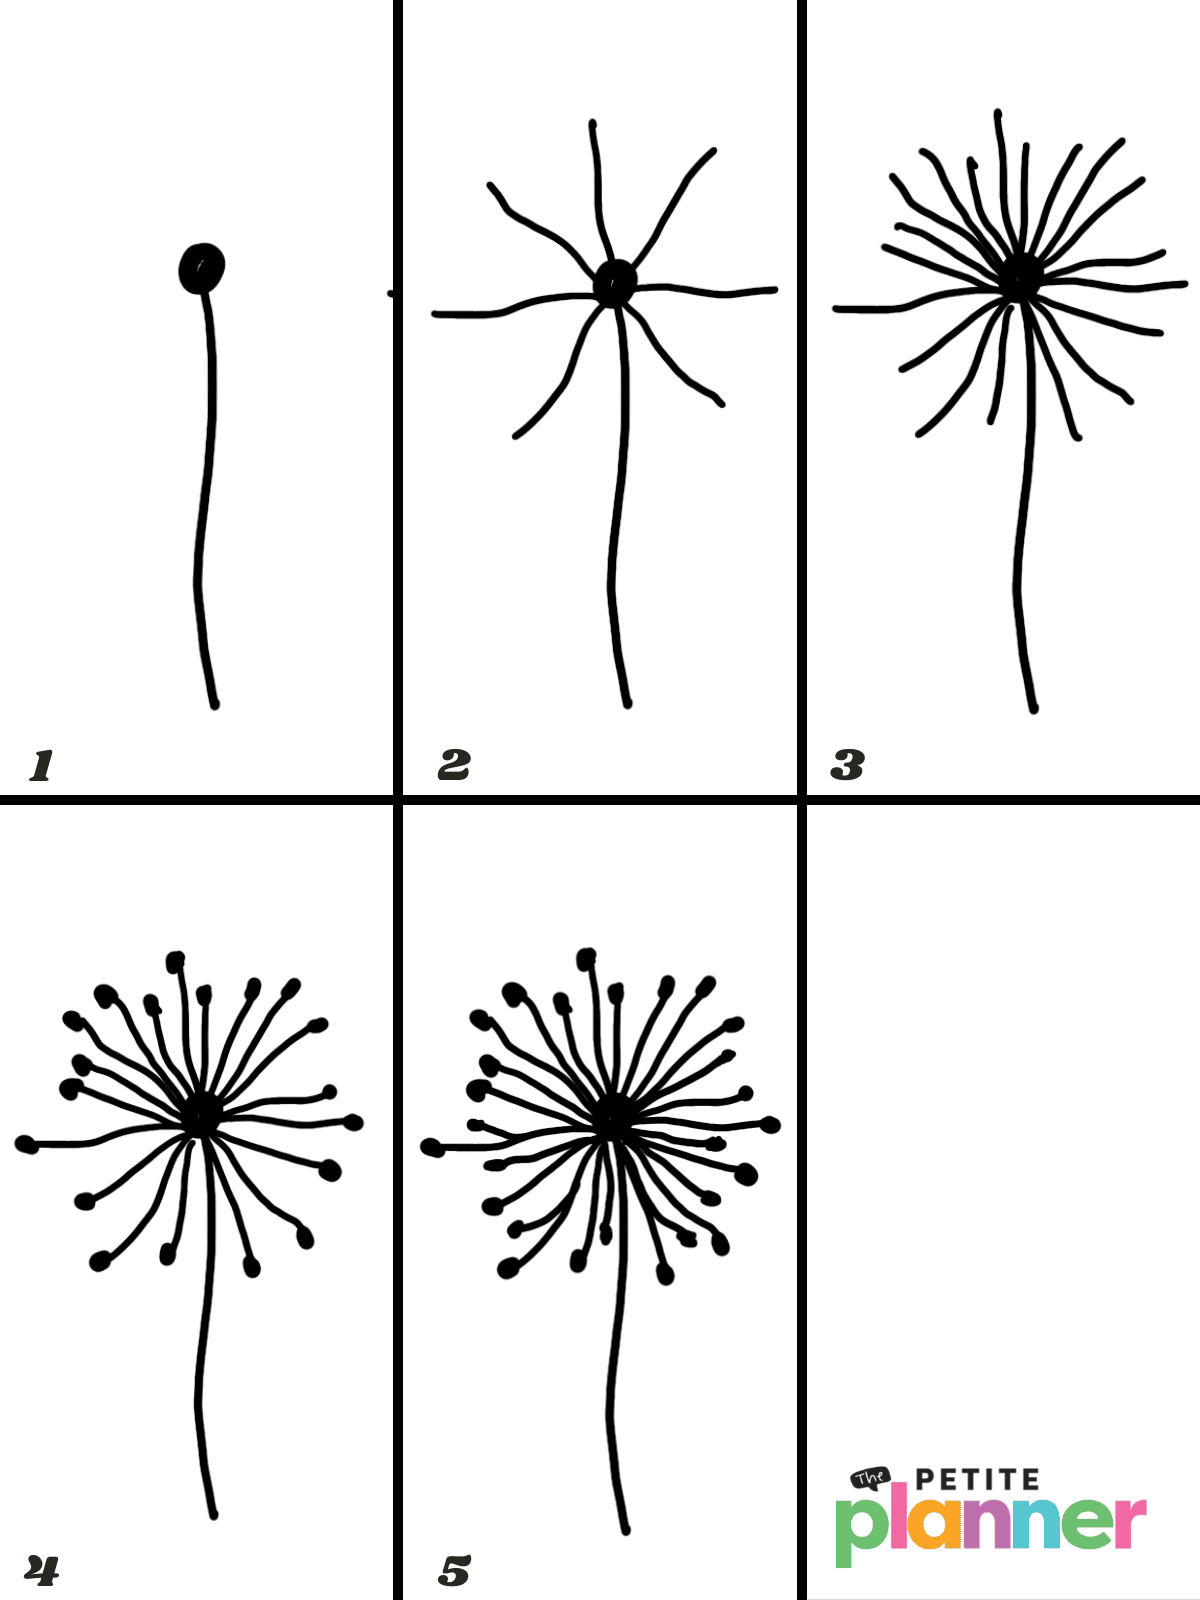 Step by step directions for a simple dandelion drawing